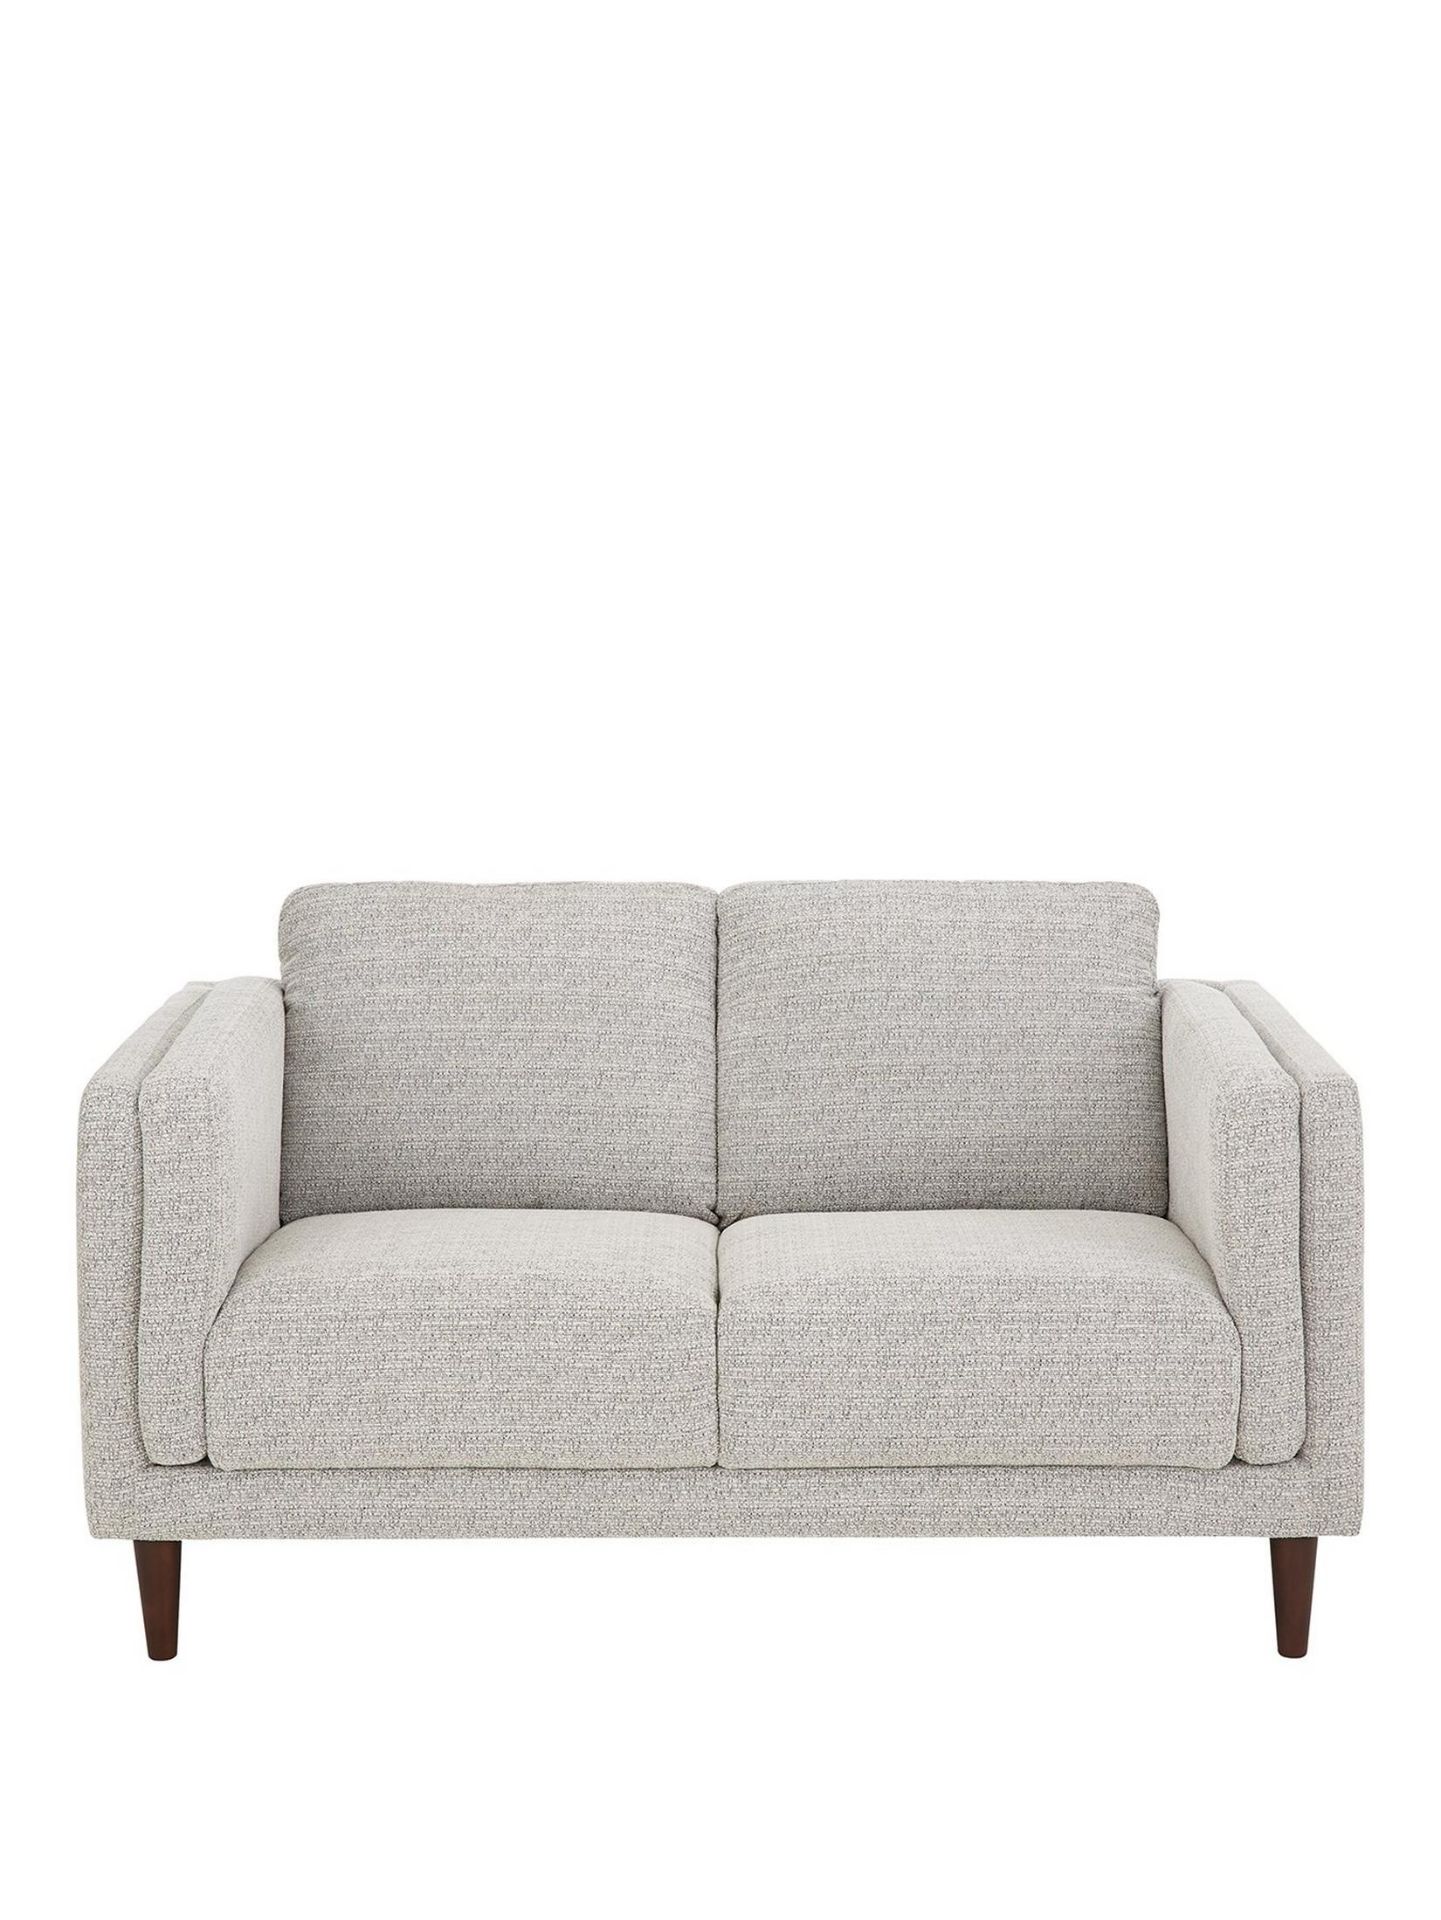 Ava 2 Seater Sofa. RPP £799.00. H 85 x W 154 x D 90 cm Modern design Ava is upholstered in a rich - Image 2 of 3